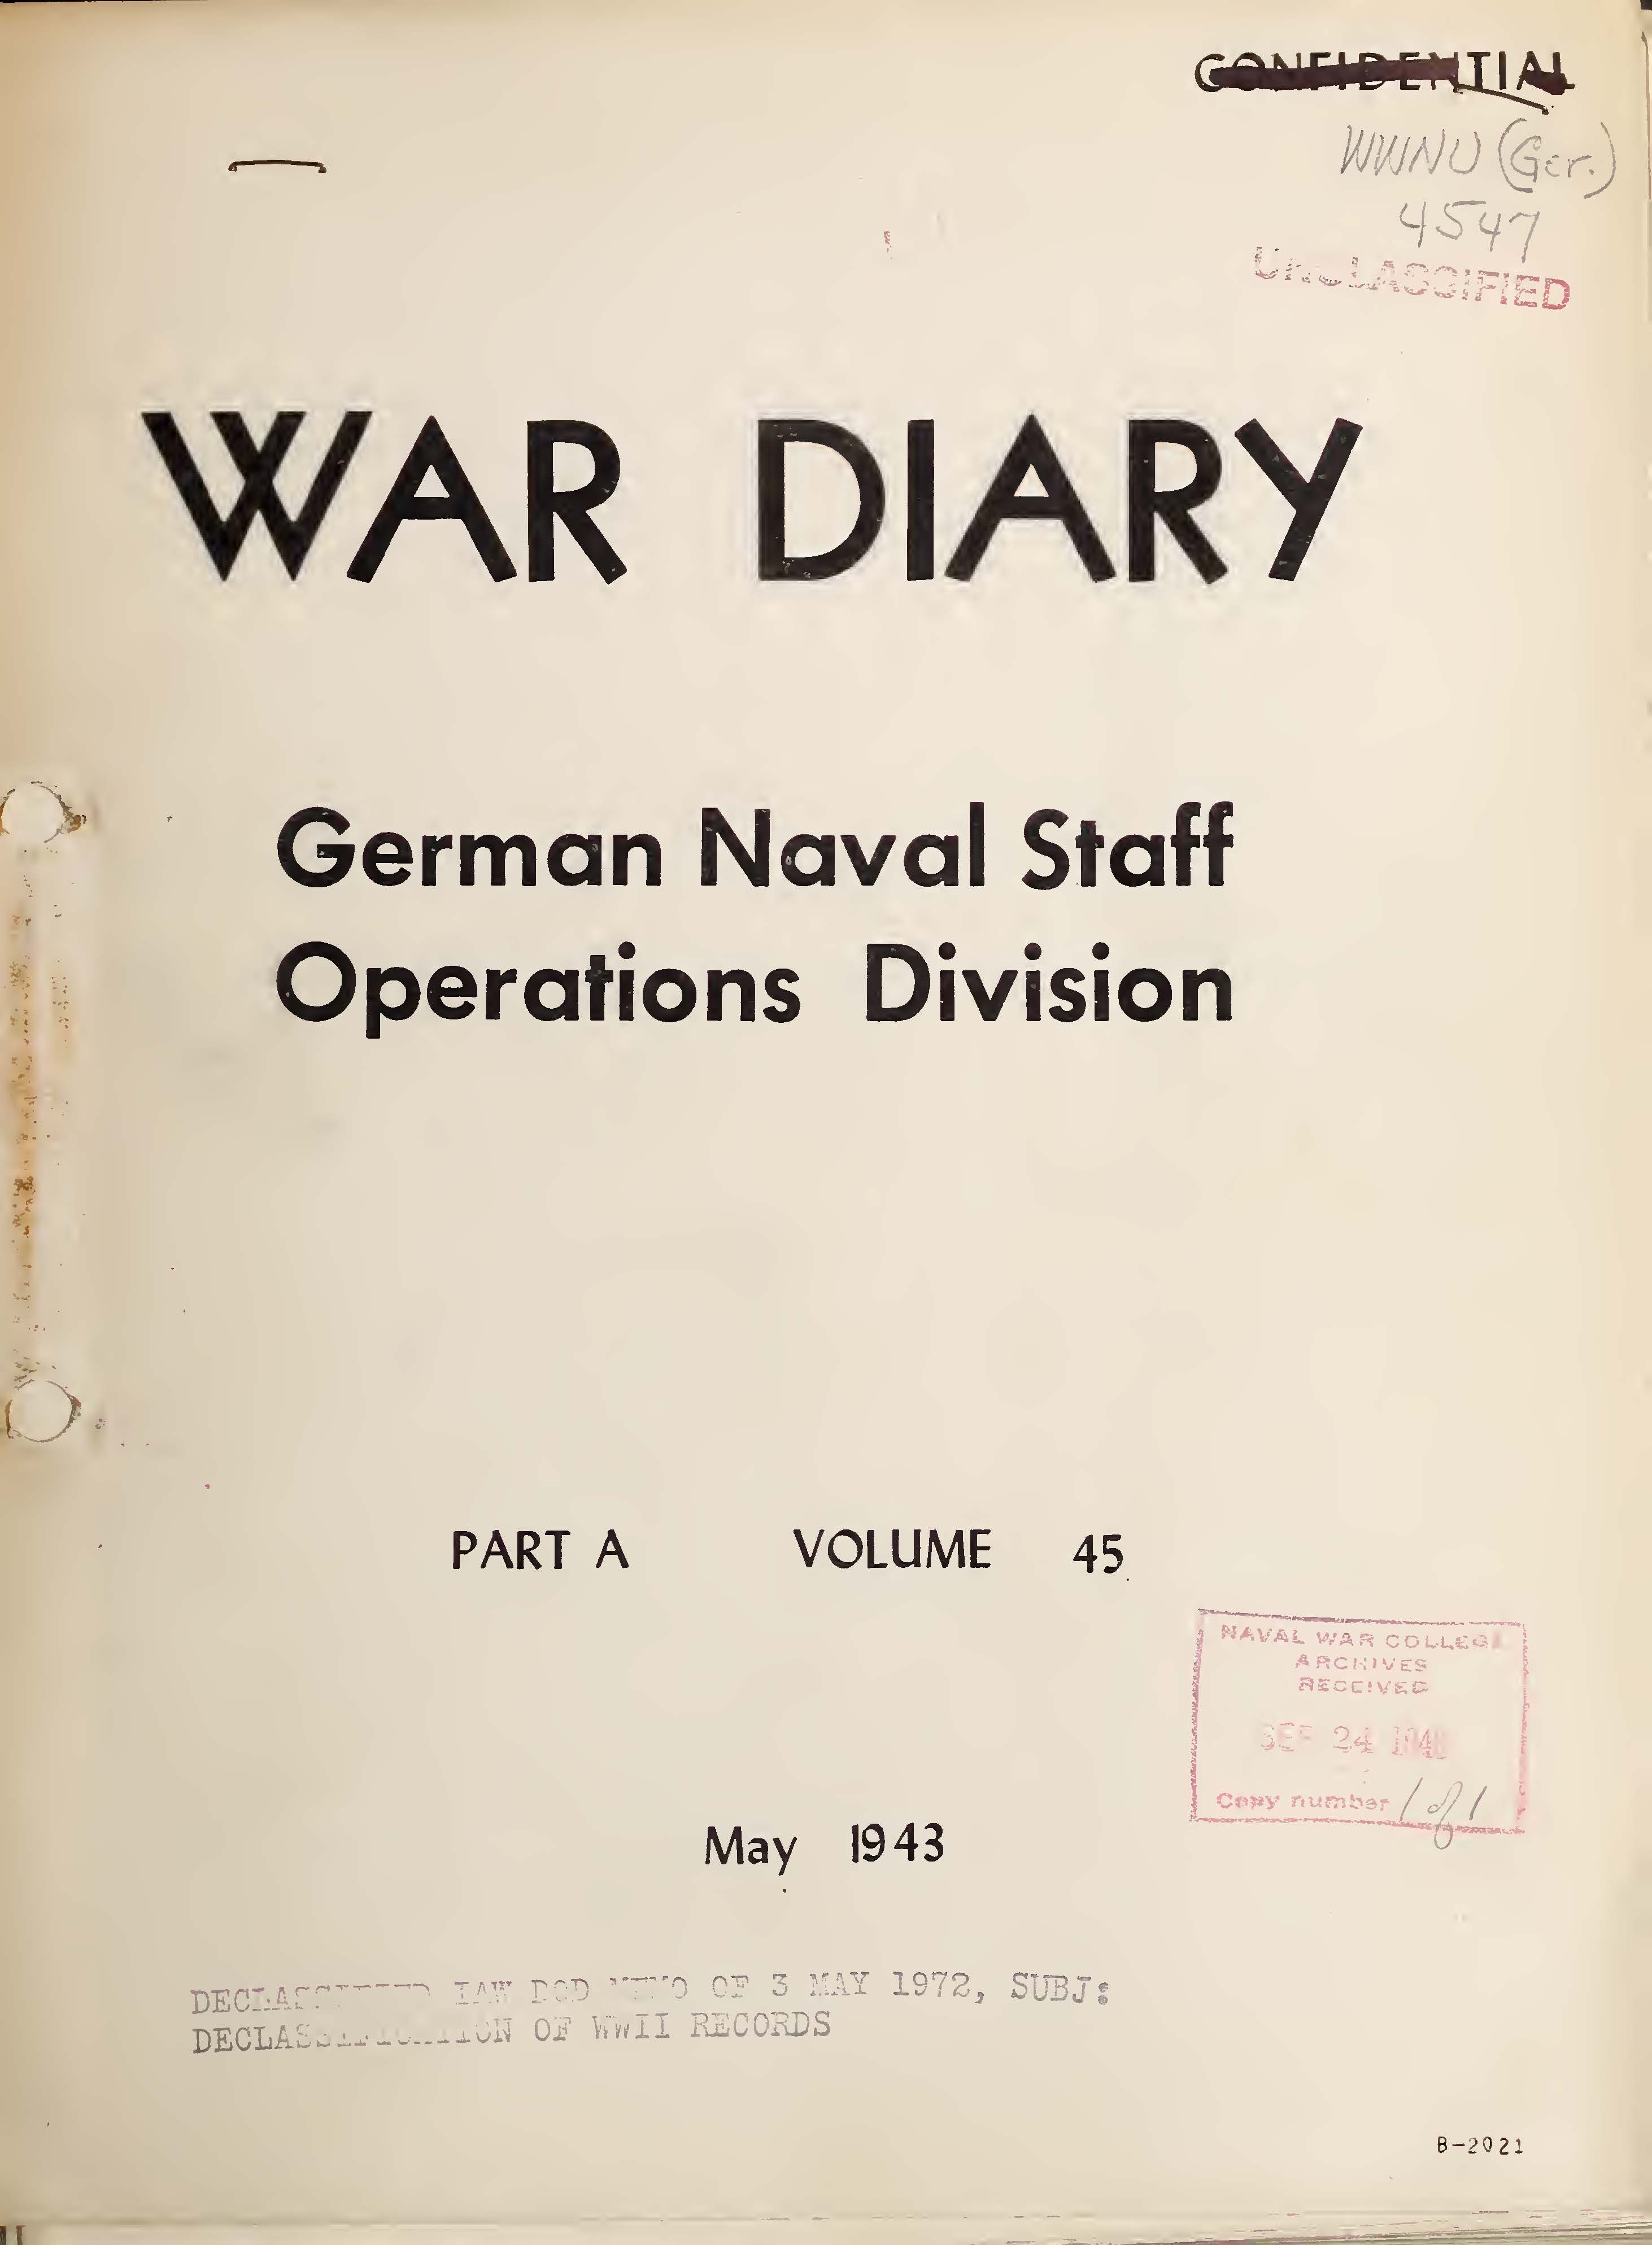 War Diary of German Naval Staff (Operations Division) Part A, Volume 45, May 1943